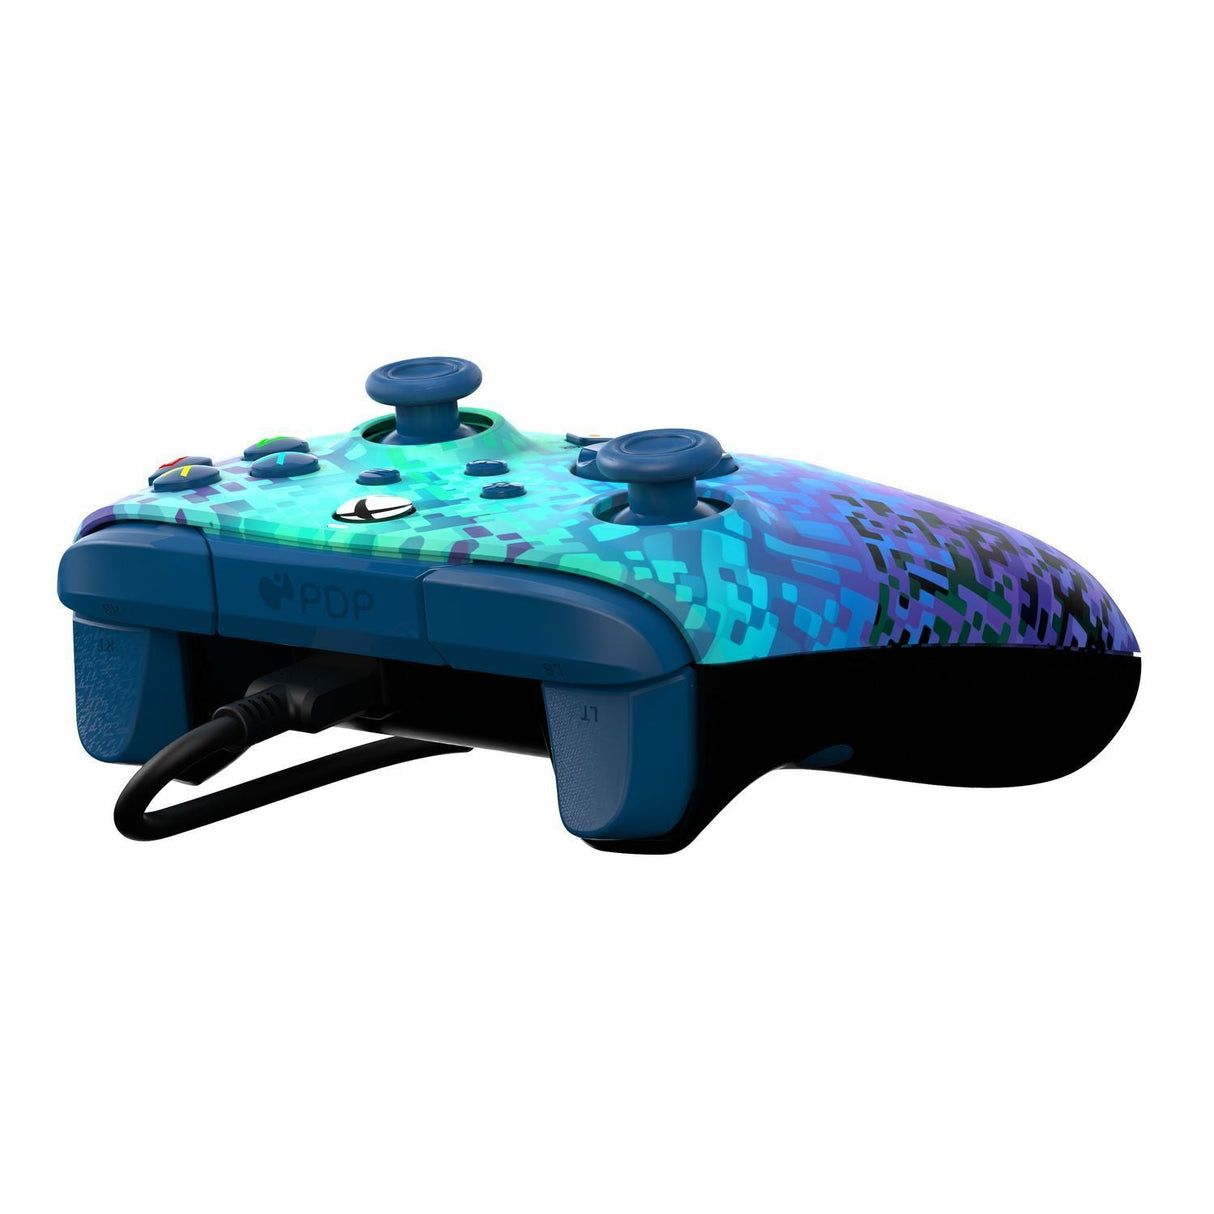 PDP Rematch Wired Controller for Xbox - Glitched Green - New